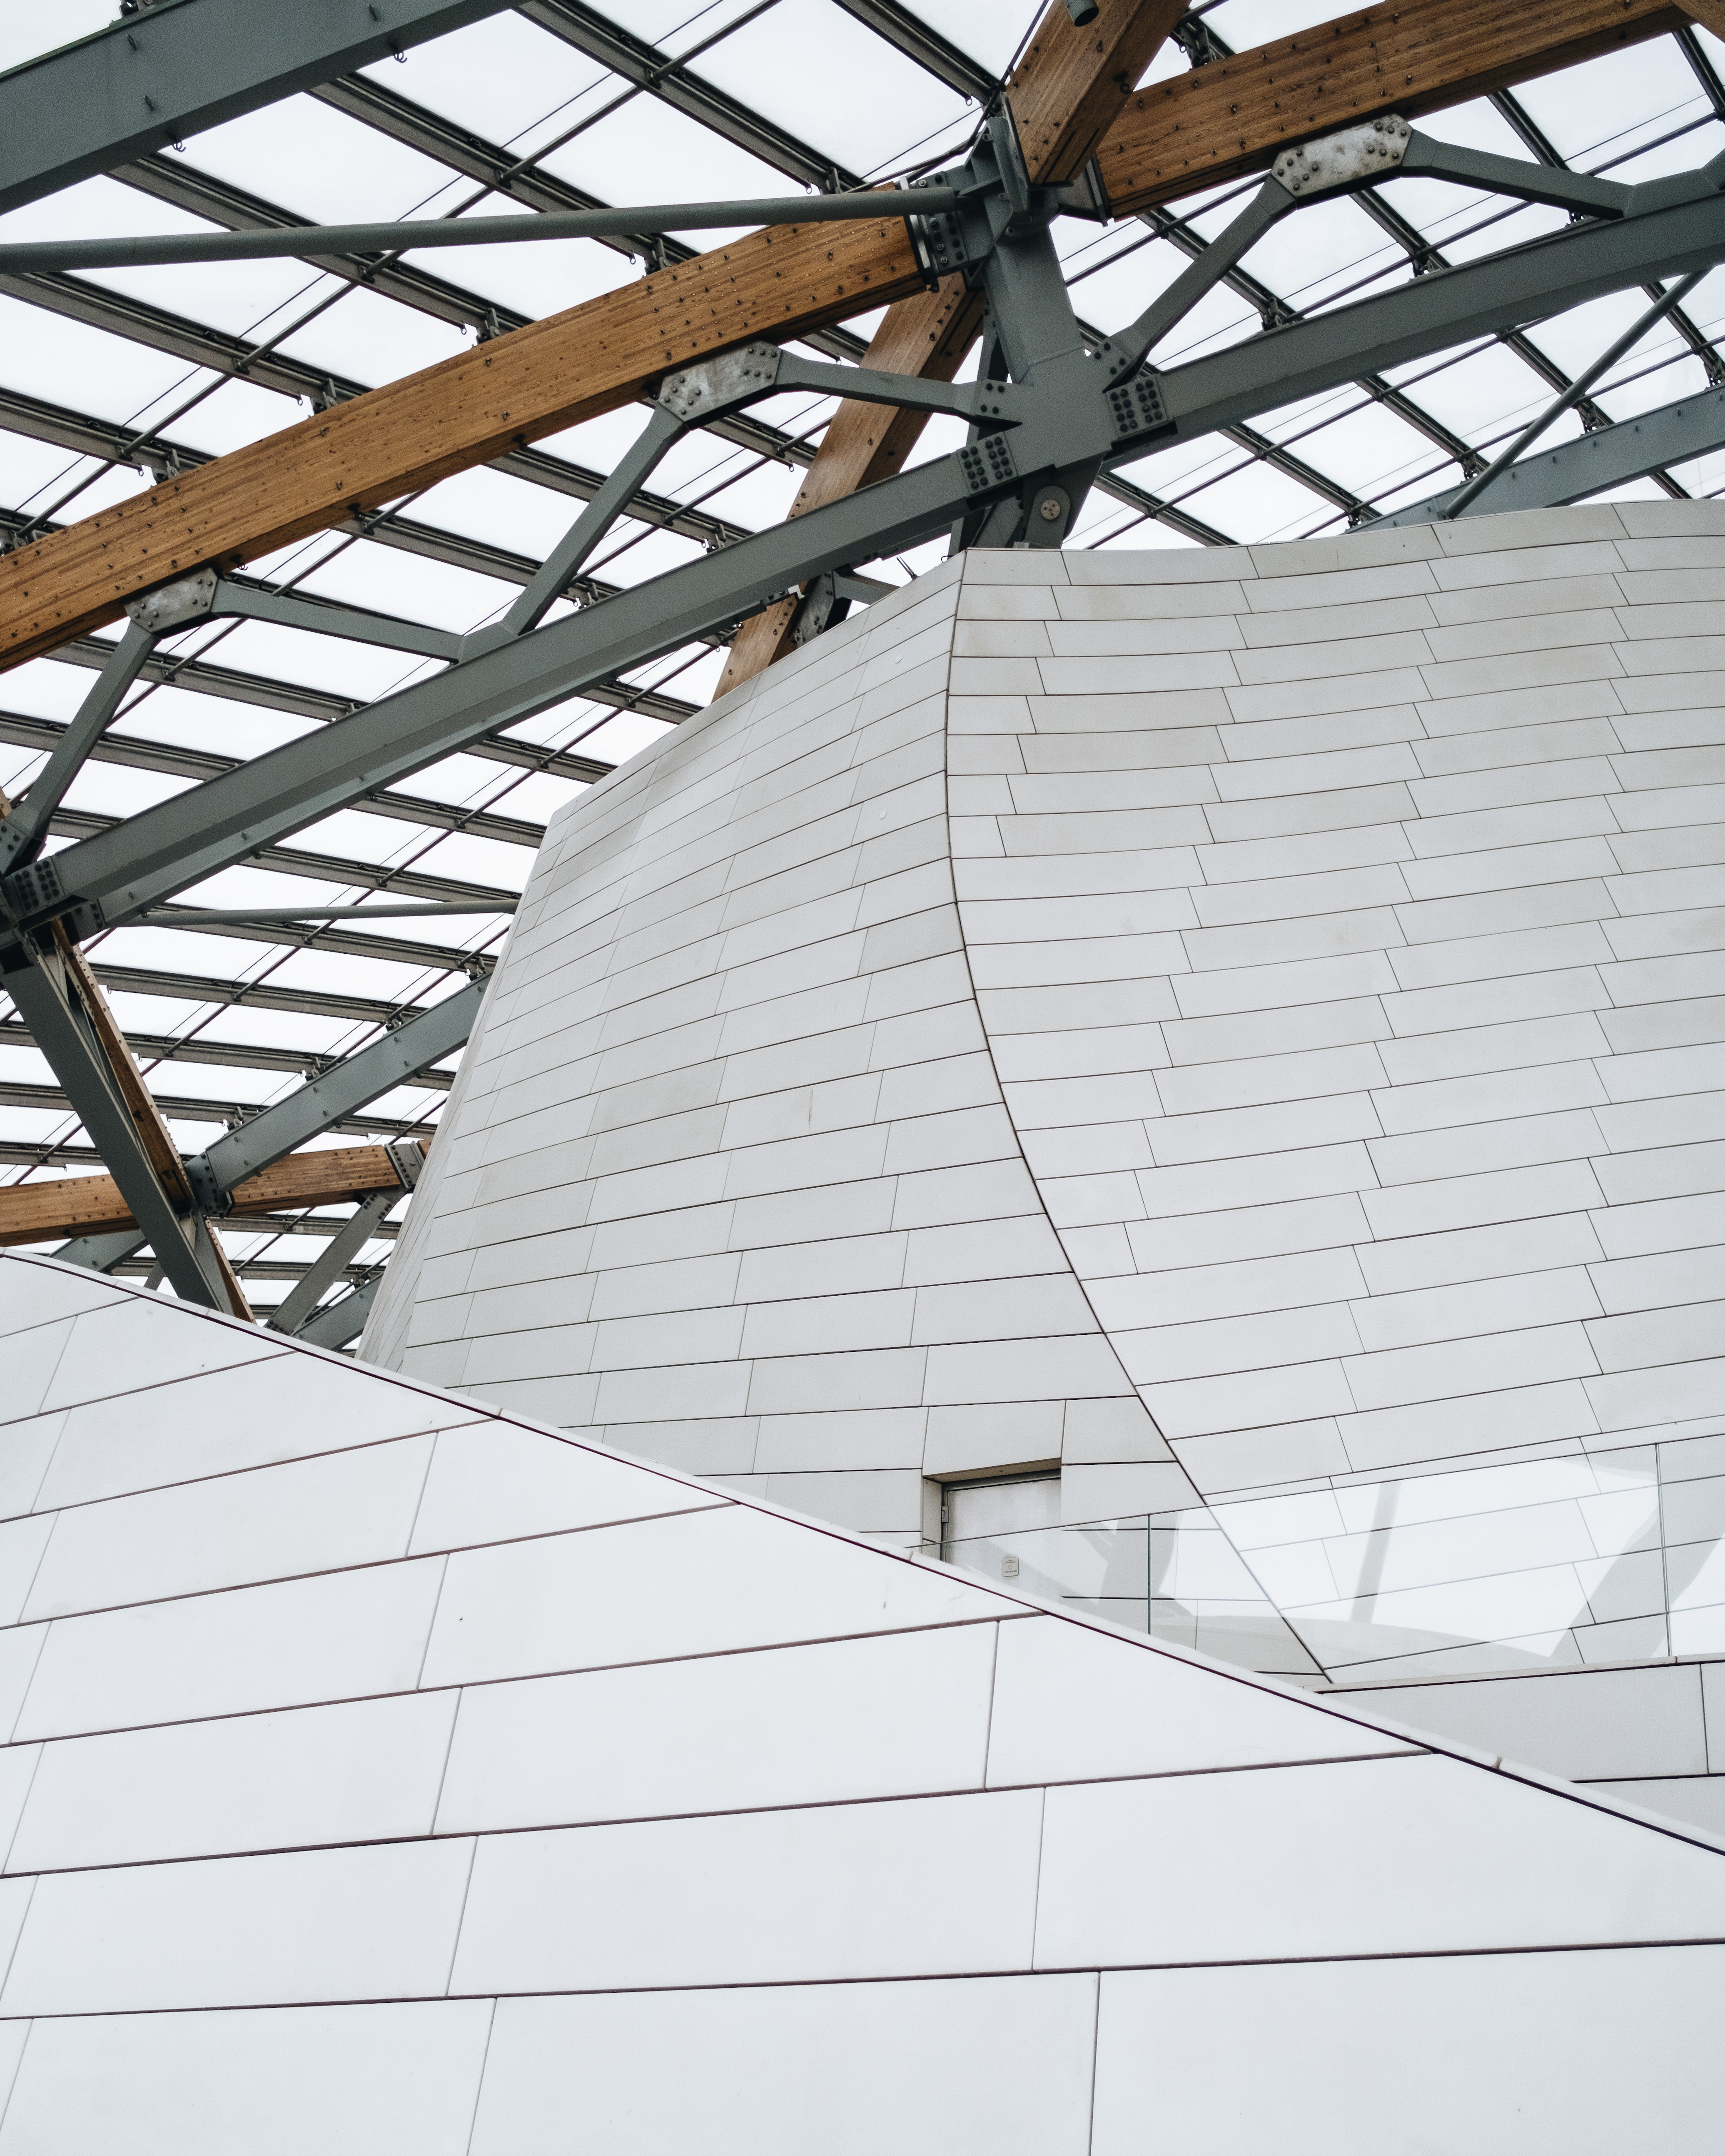 Inside Gehry's Louis Vuitton Foundation